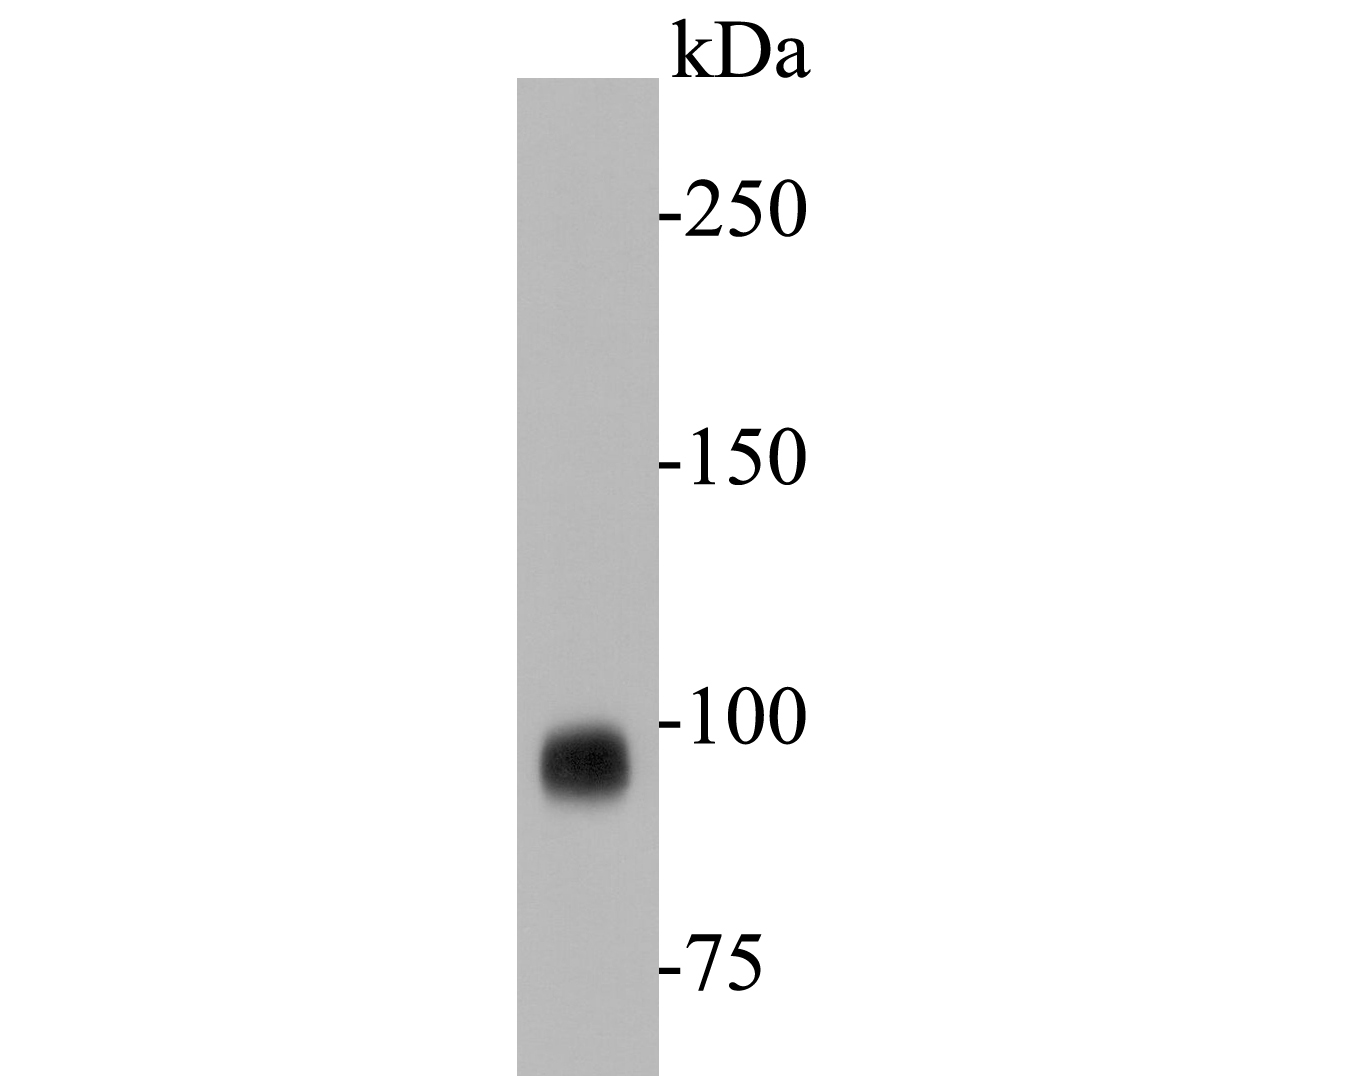 Western blot analysis of CD10 on Daudi cell lysate. Proteins were transferred to a PVDF membrane and blocked with 5% BSA in PBS for 1 hour at room temperature. The primary antibody (EM1901-25, 1/500) was used in 5% BSA at room temperature for 2 hours. Goat Anti-Mouse IgG - HRP Secondary Antibody (HA1006) at 1:5,000 dilution was used for 1 hour at room temperature.